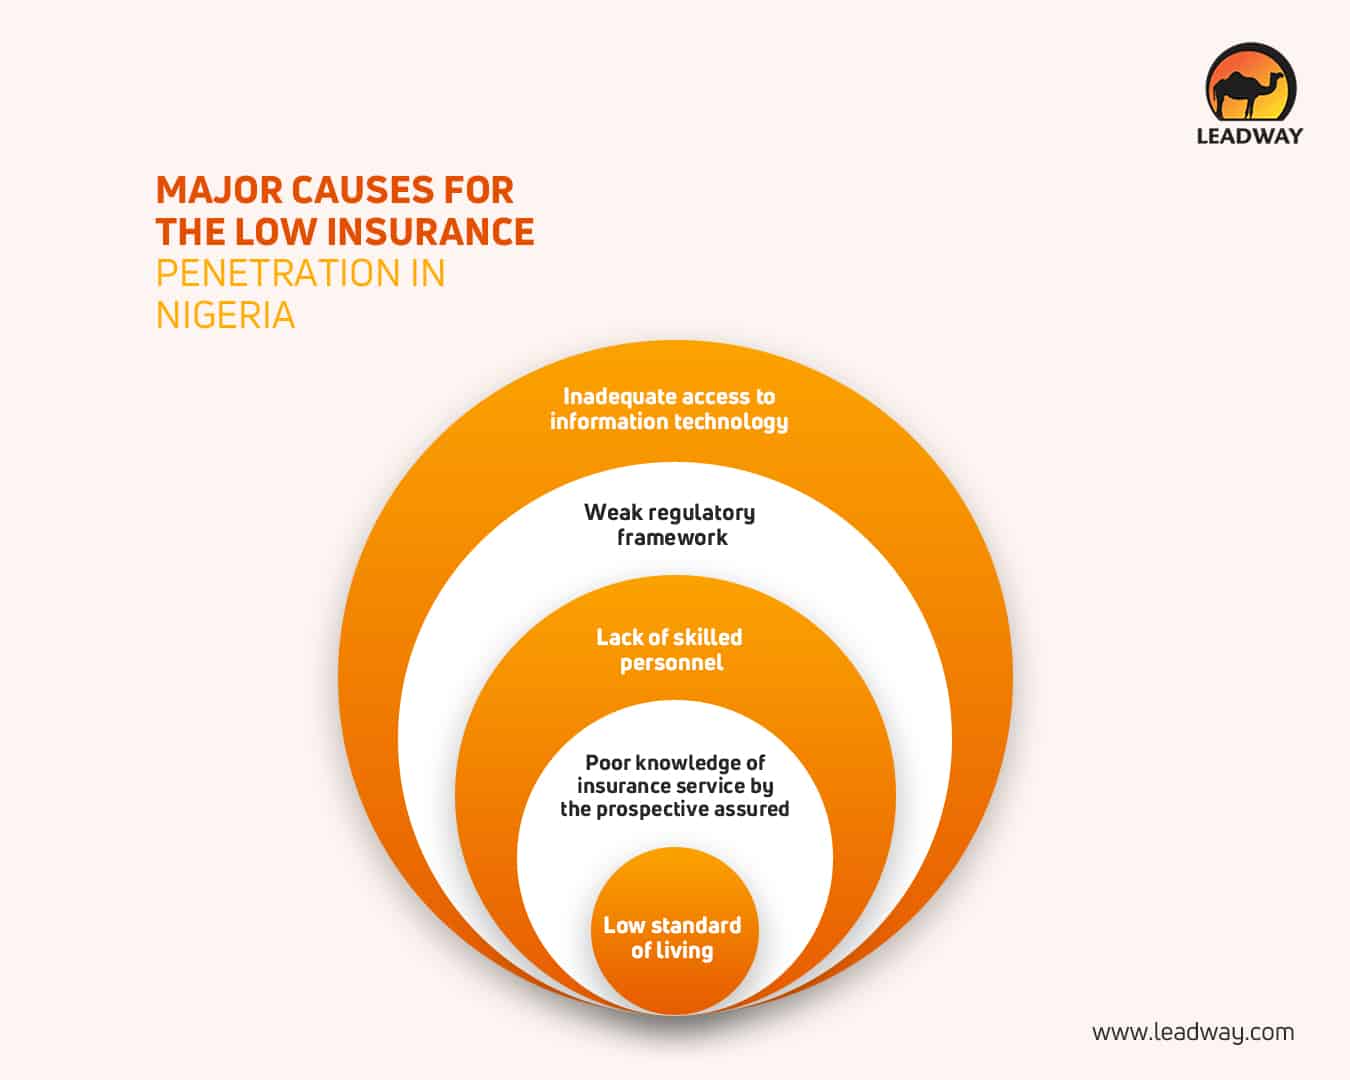 Major causes for the low insurance penetration in Nigeria infographic